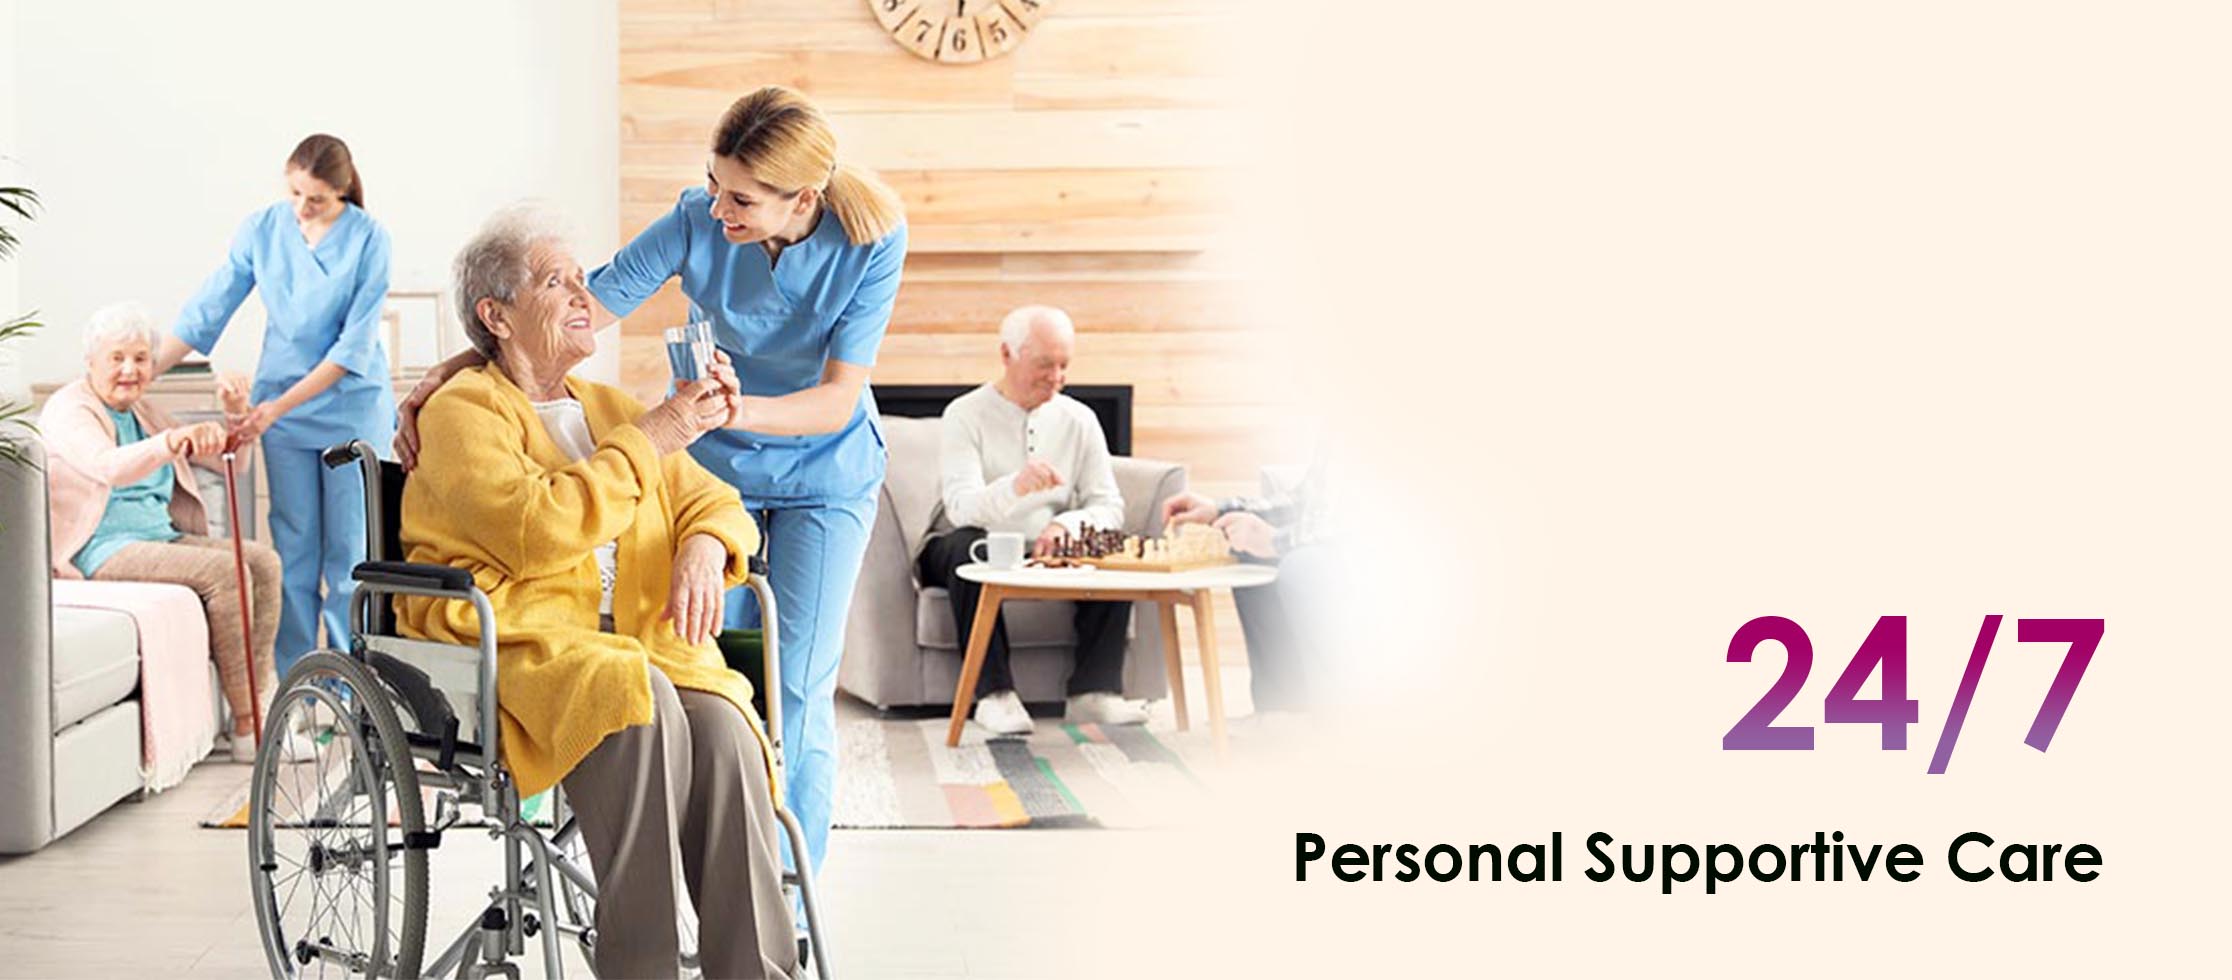 Personal Supportive Care